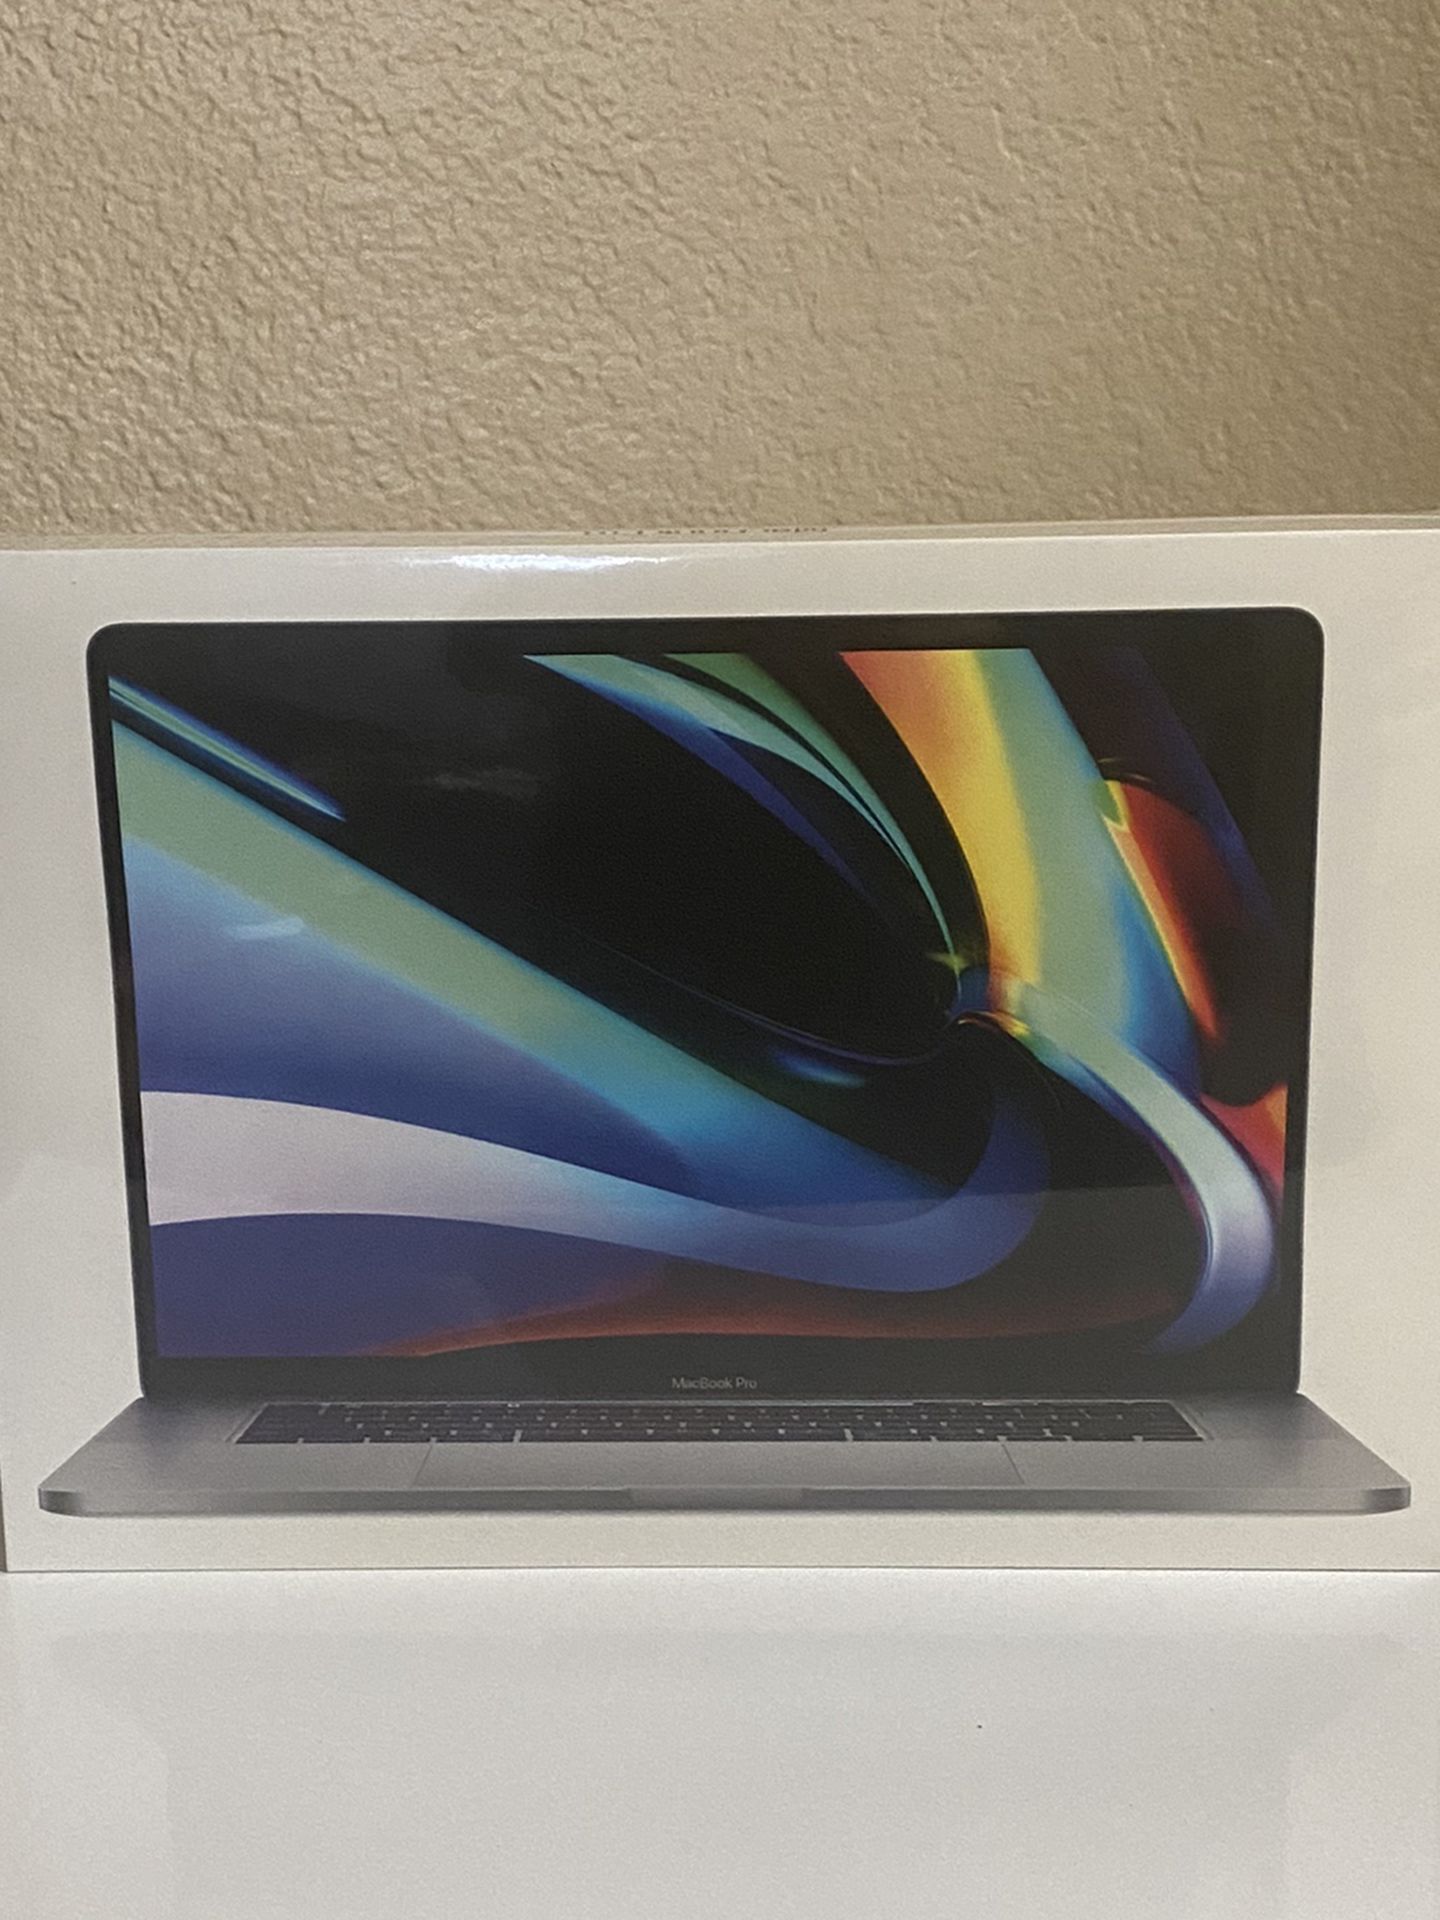 New Apple MacBook Pro (16-inch, 16GB RAM, 1TB Storage, 2.3GHz Intel Core i9) - Space Gray (Sealed And Brand New) BEST OFFER WINS!!!